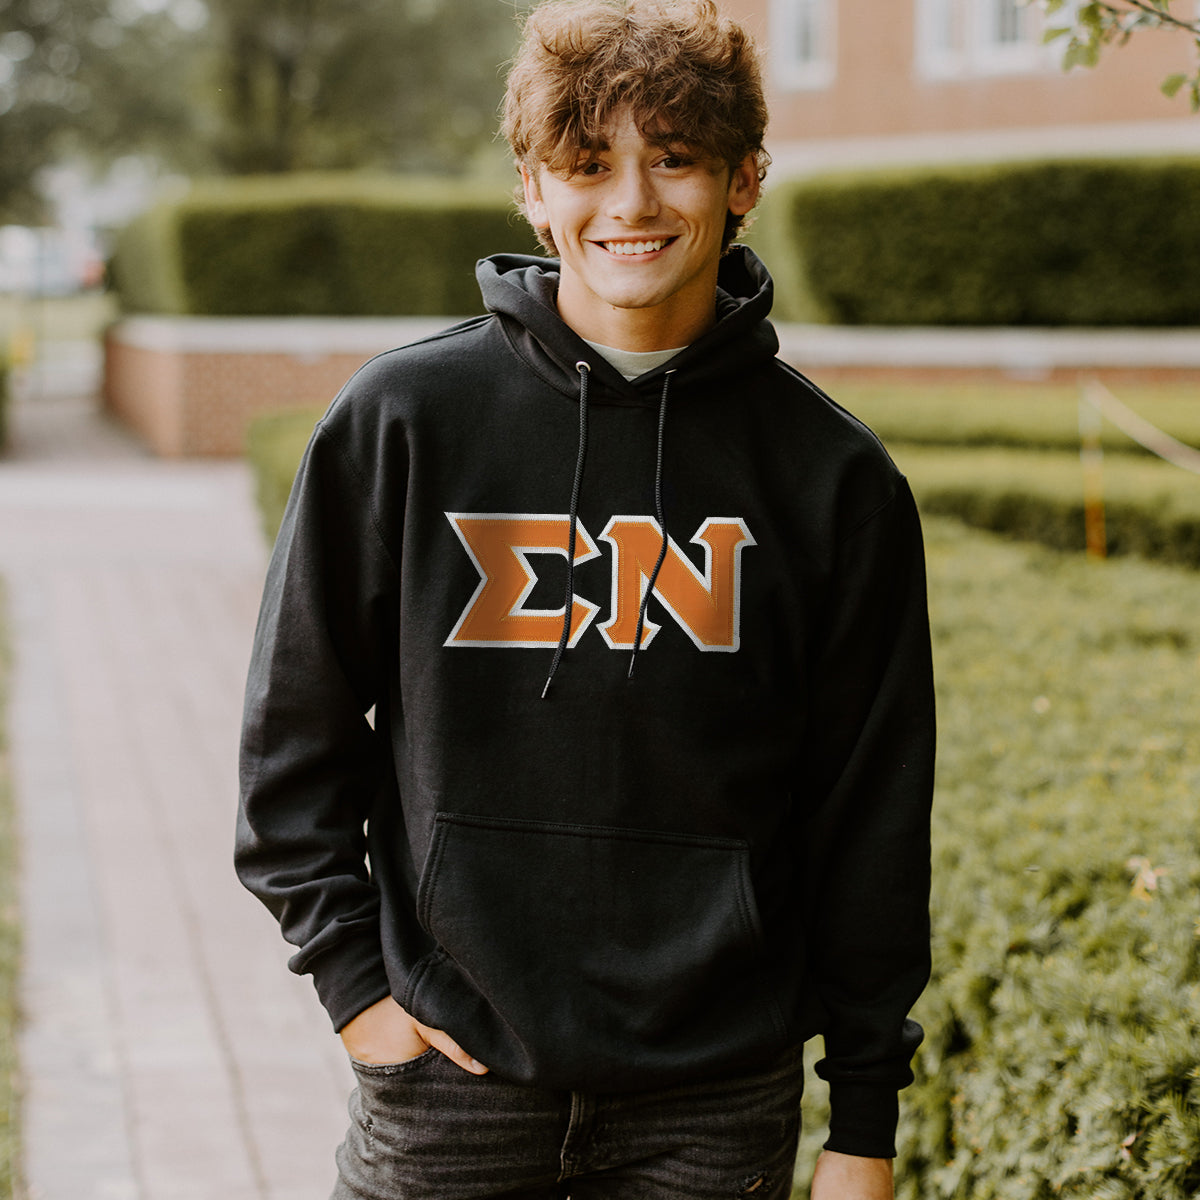 Sigma Nu Black Hoodie with Sewn On Gold Letters